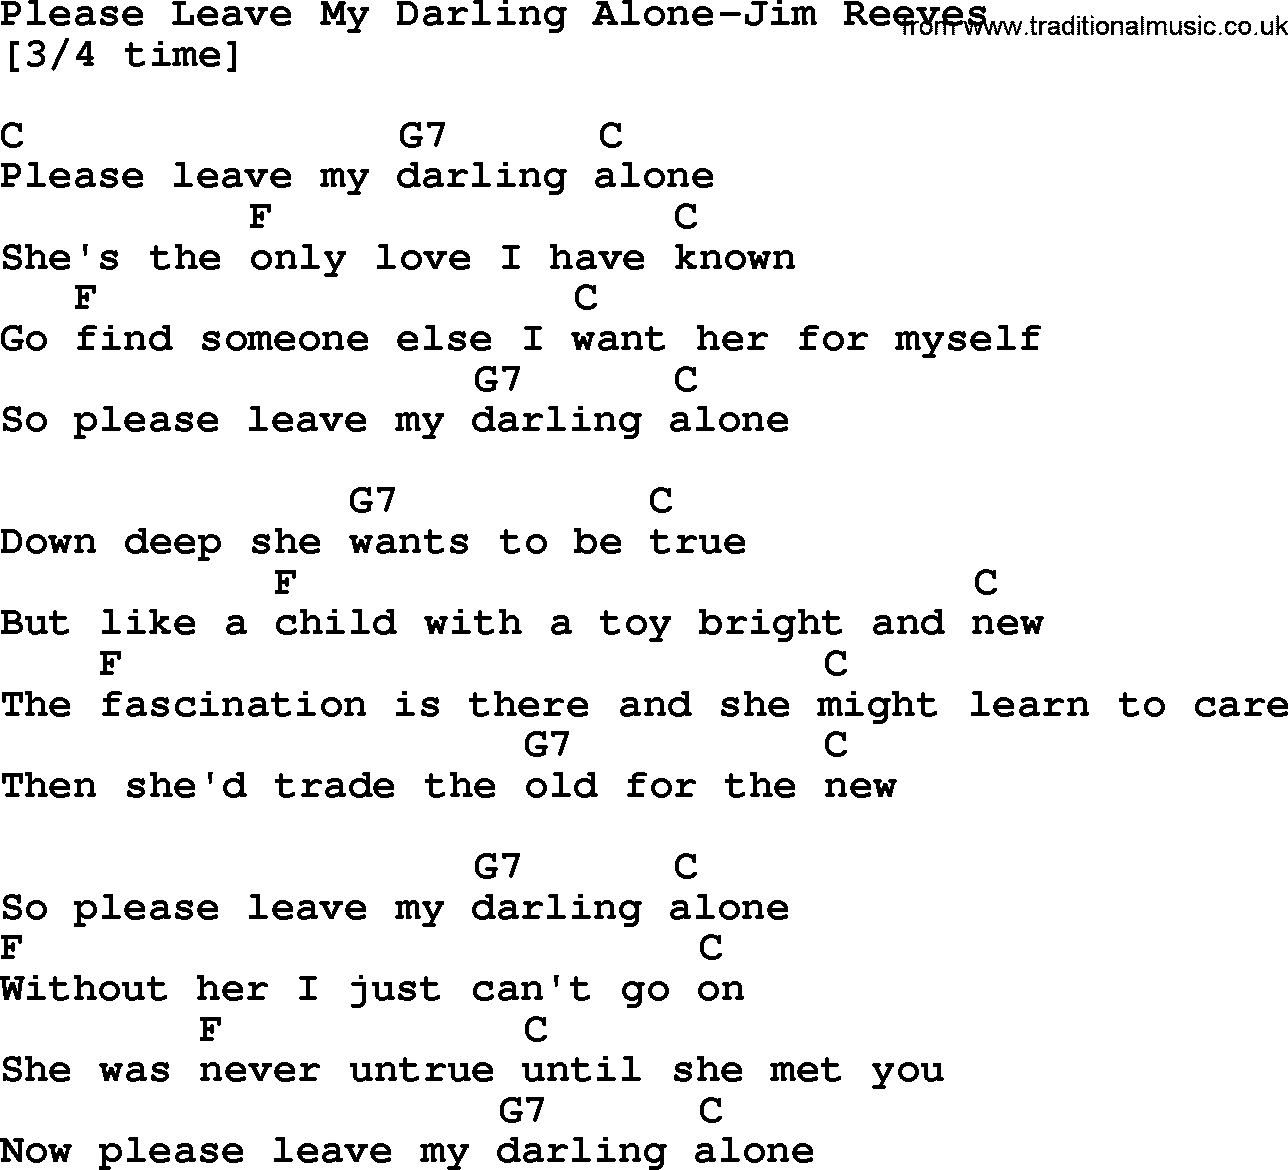 Country music song: Please Leave My Darling Alone-Jim Reeves lyrics and chords